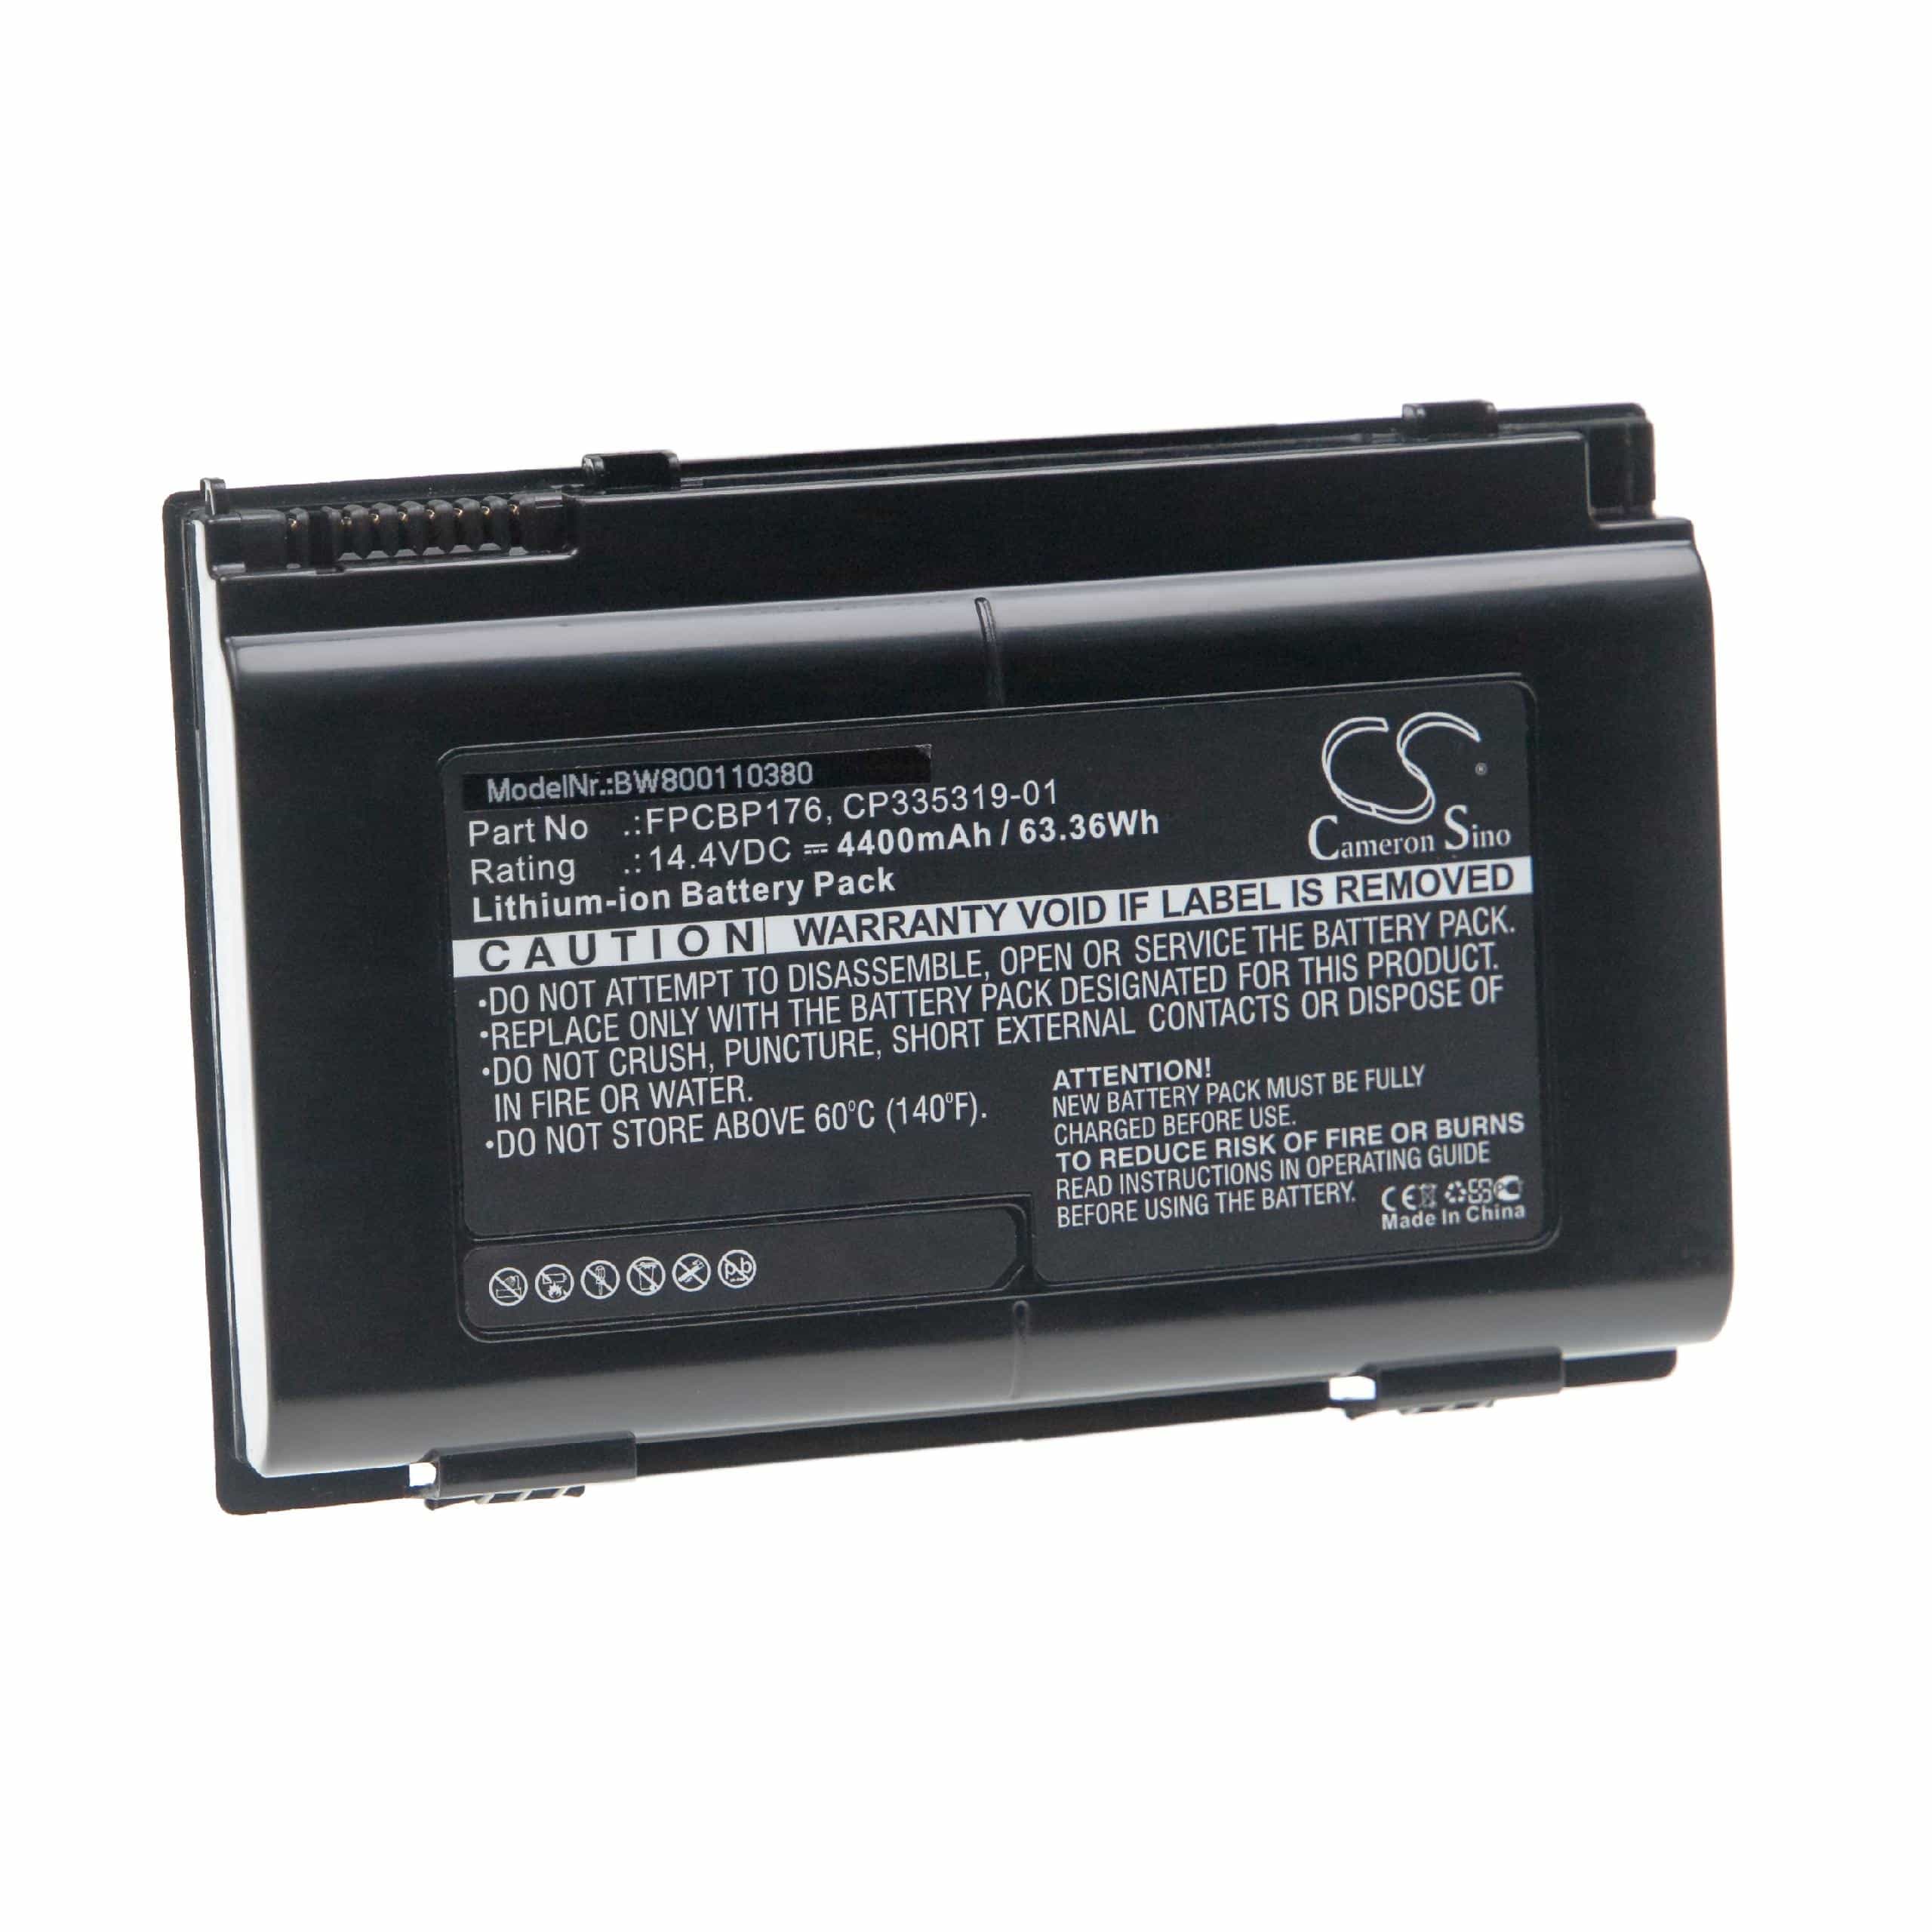 Notebook Battery Replacement for Fujitsu 0644670, CP335311-01, FPCBP175 - 4400mAh 14.4V Li-Ion, black